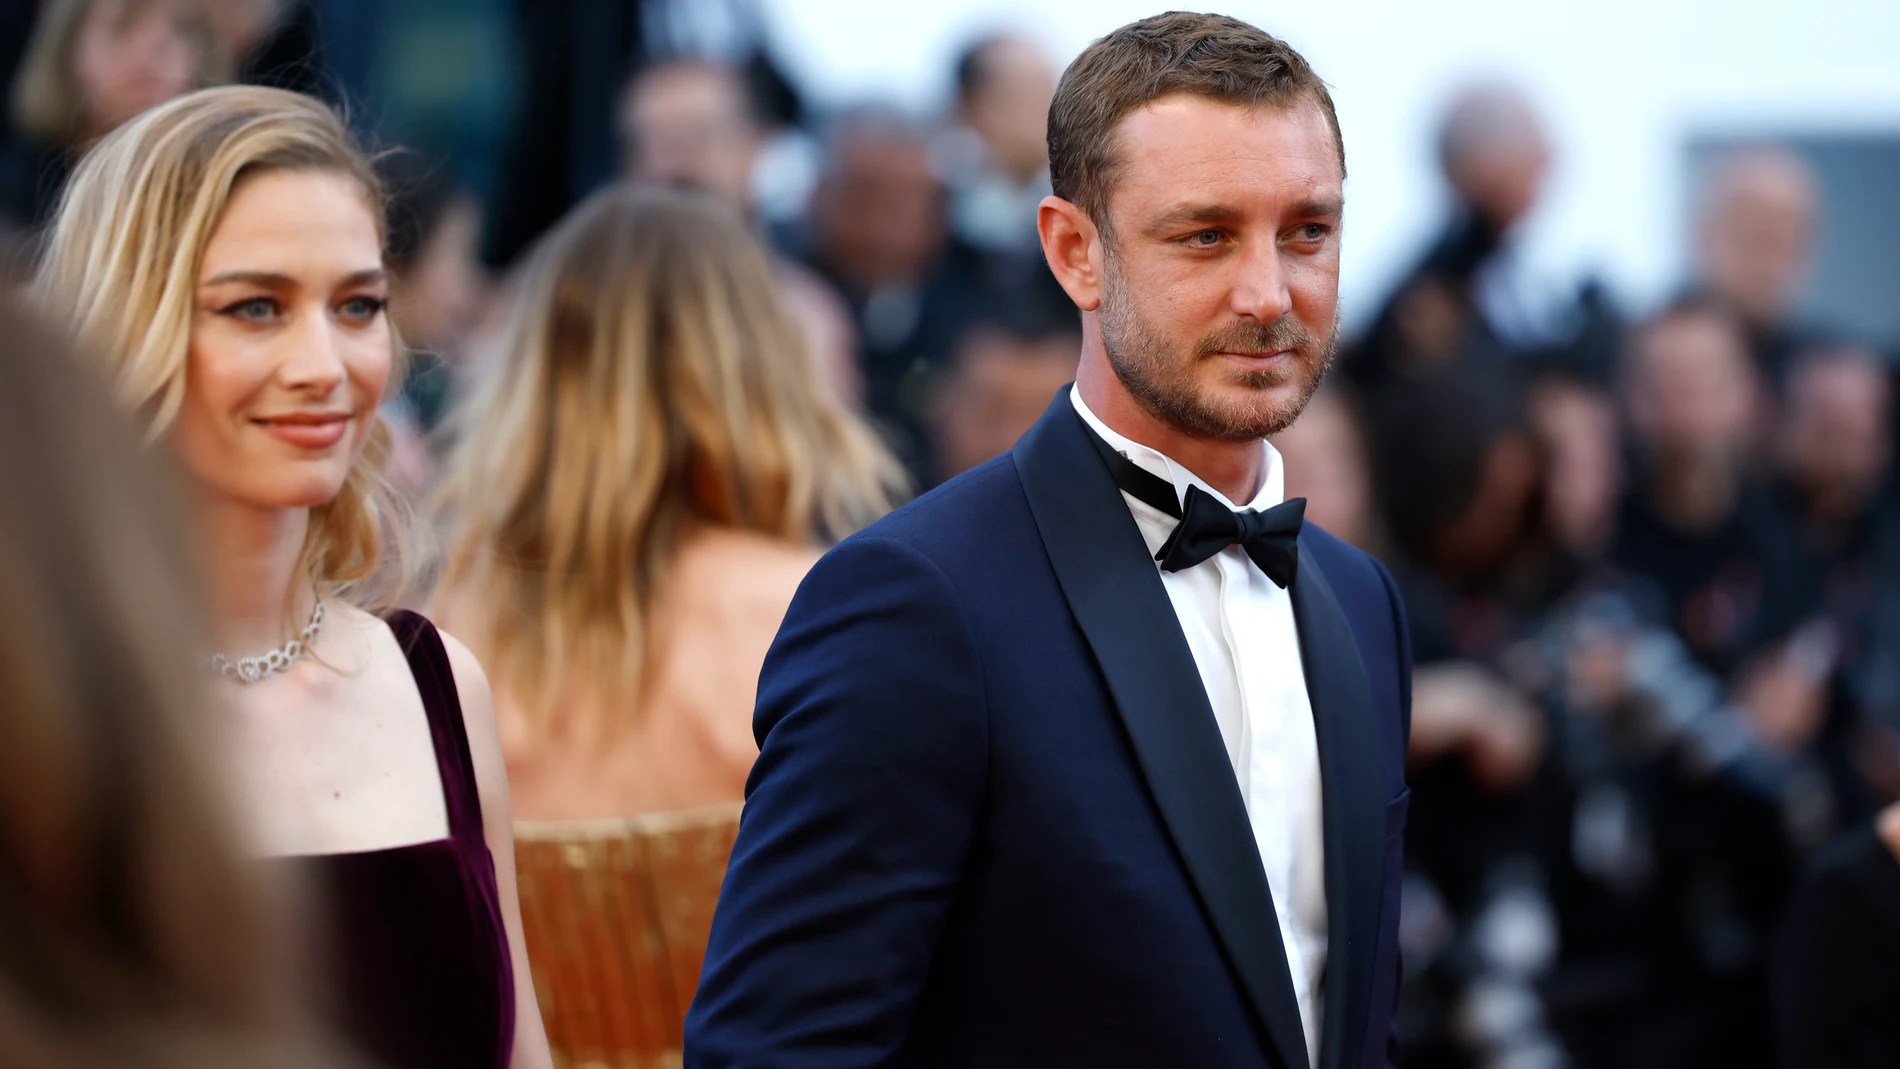 Cannes (France), 22/05/2024.- Beatrice Borromeo (L) and Pierre Casiraghi at the premiere of 'Le Comte de Monte-Cristo' (The Count of Monte Cristo) during the 77th annual Cannes Film Festival, in Cannes, France, 22 May 2024. The movie is presented out of competition of the festival which runs from 14 to 25 May 2024. (Cine, Francia, Roma) EFE/EPA/SEBASTIEN NOGIER